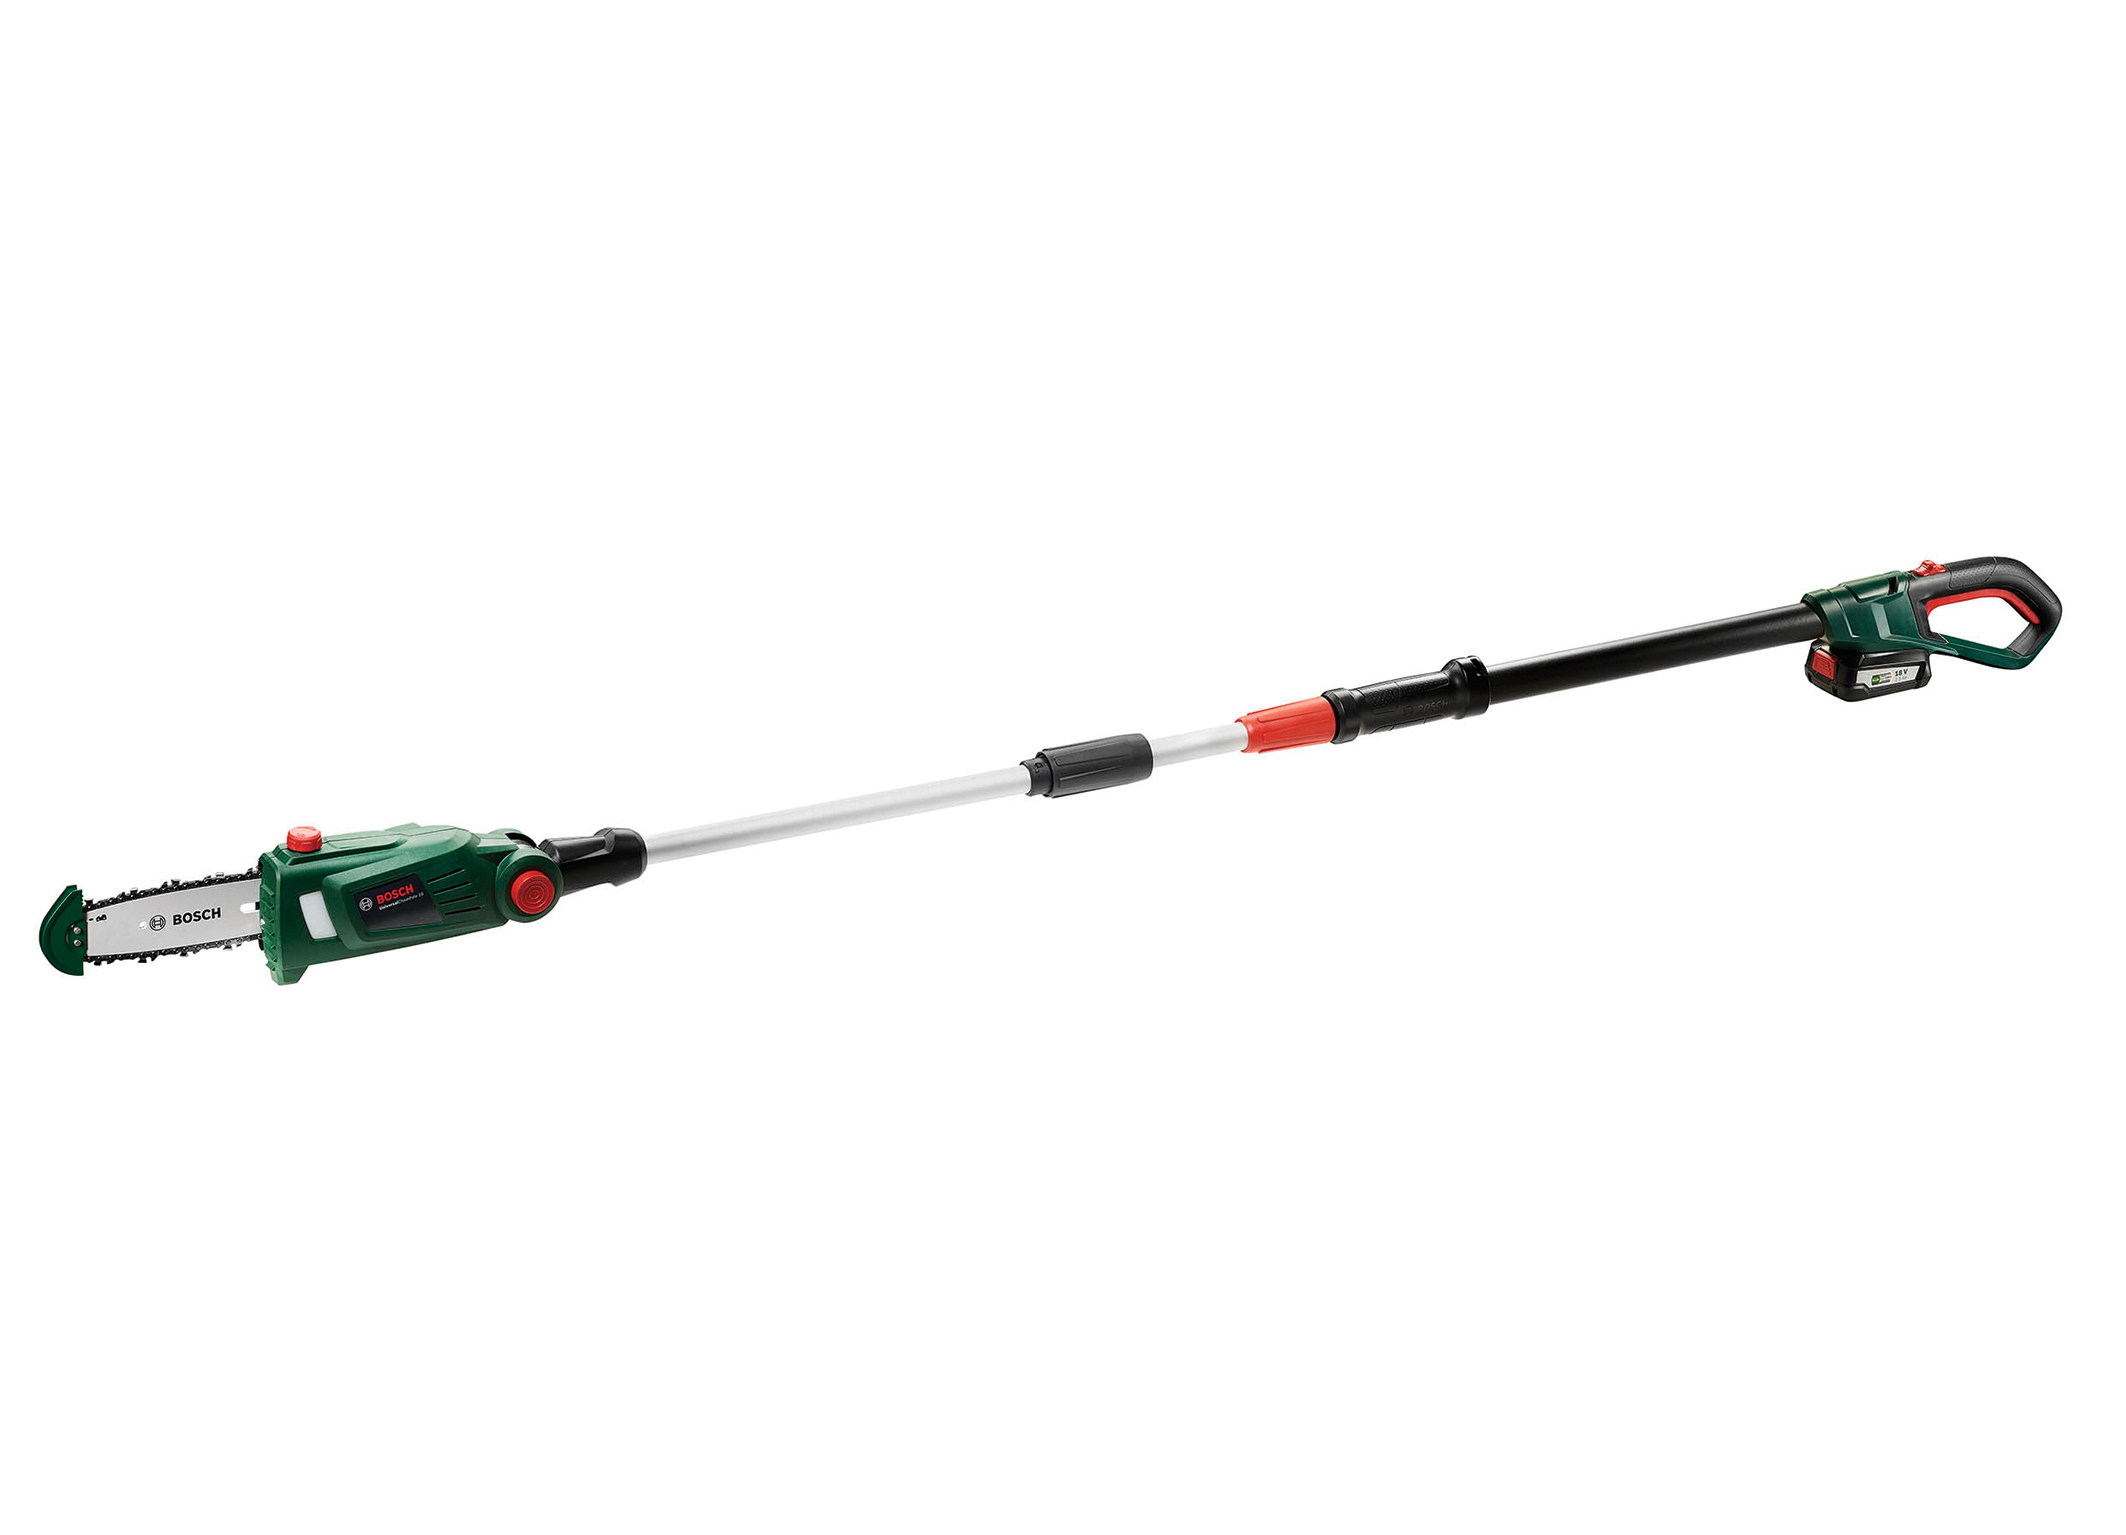 Telescopic tool for effortless work without a ladder: UniversalChainPole 18 pruner from Bosch